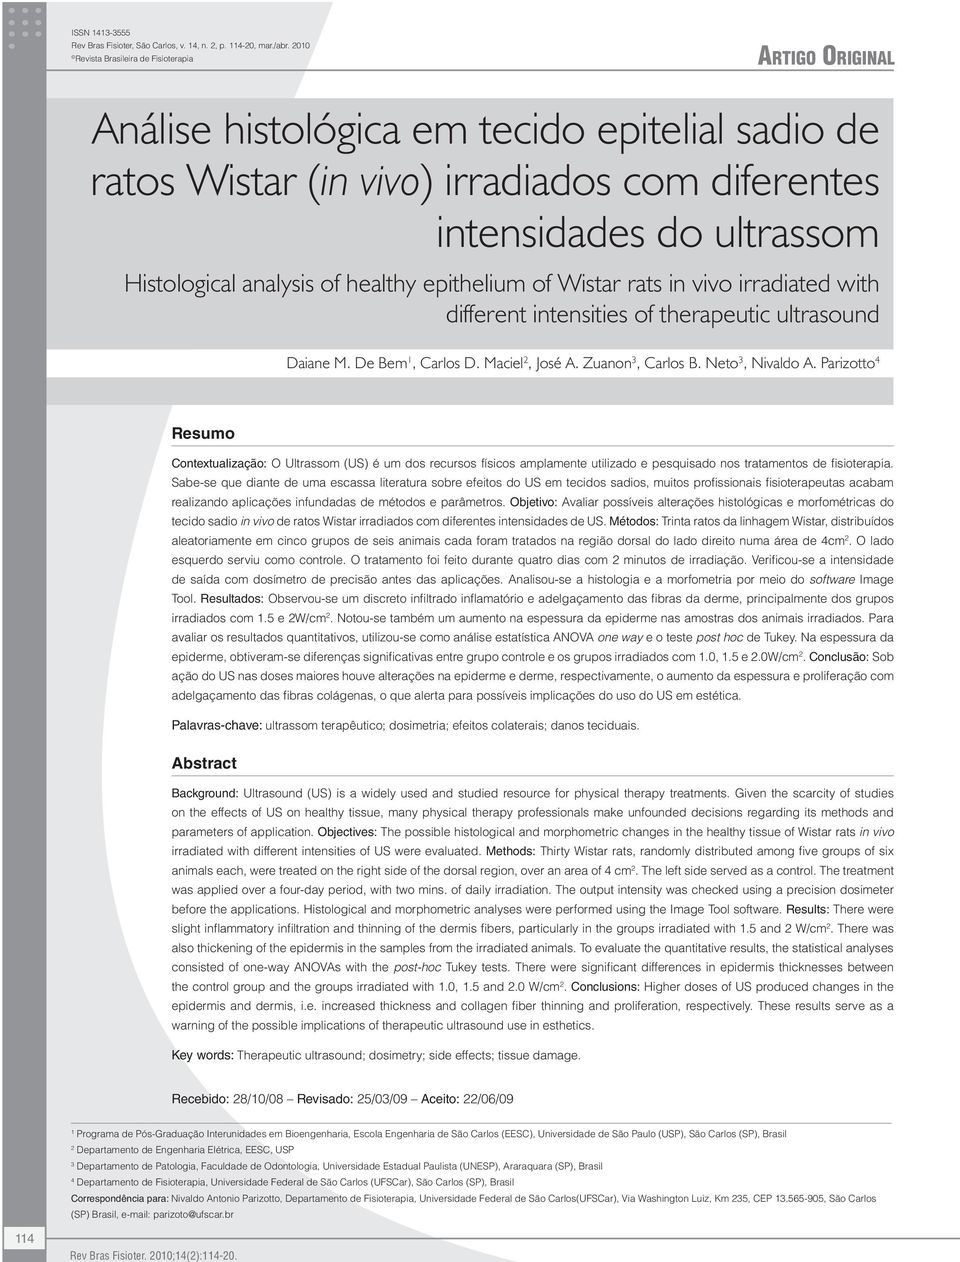 analysis of healthy epithelium of Wistar rats in vivo irradiated with different intensities of therapeutic ultrasound Daiane M. De Bem 1, Carlos D. Maciel 2, José A. Zuanon 3, Carlos B.